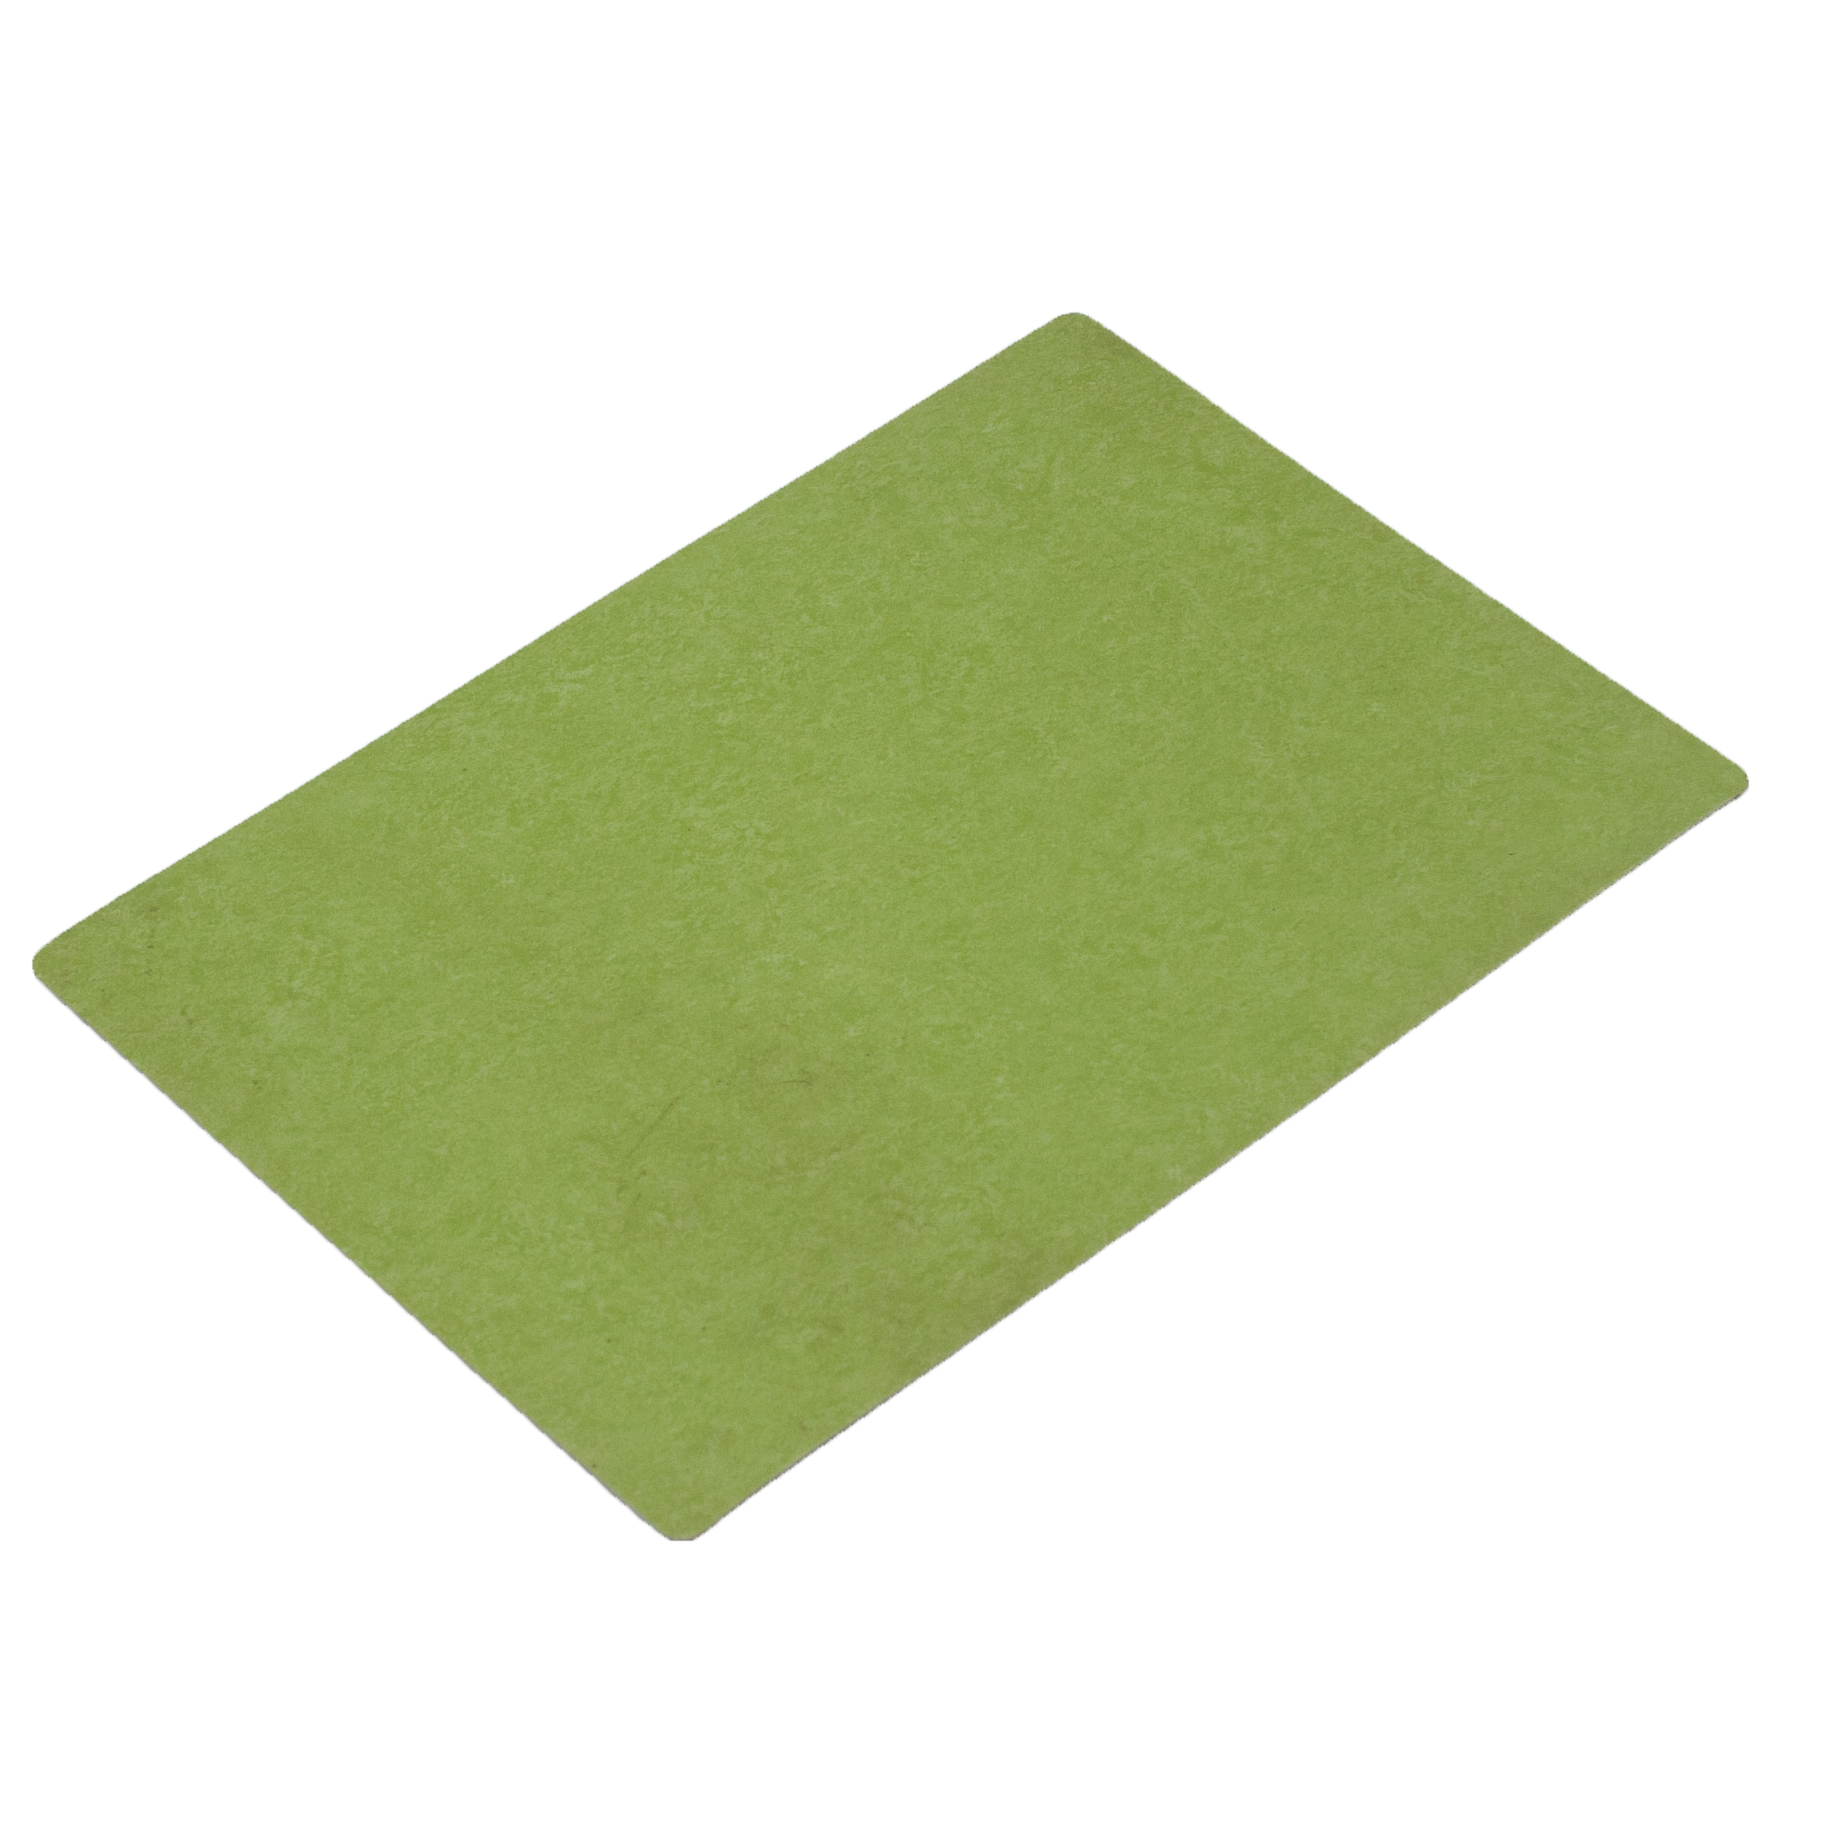 Commercial Self-Adhesive PVC Flooring For Basement